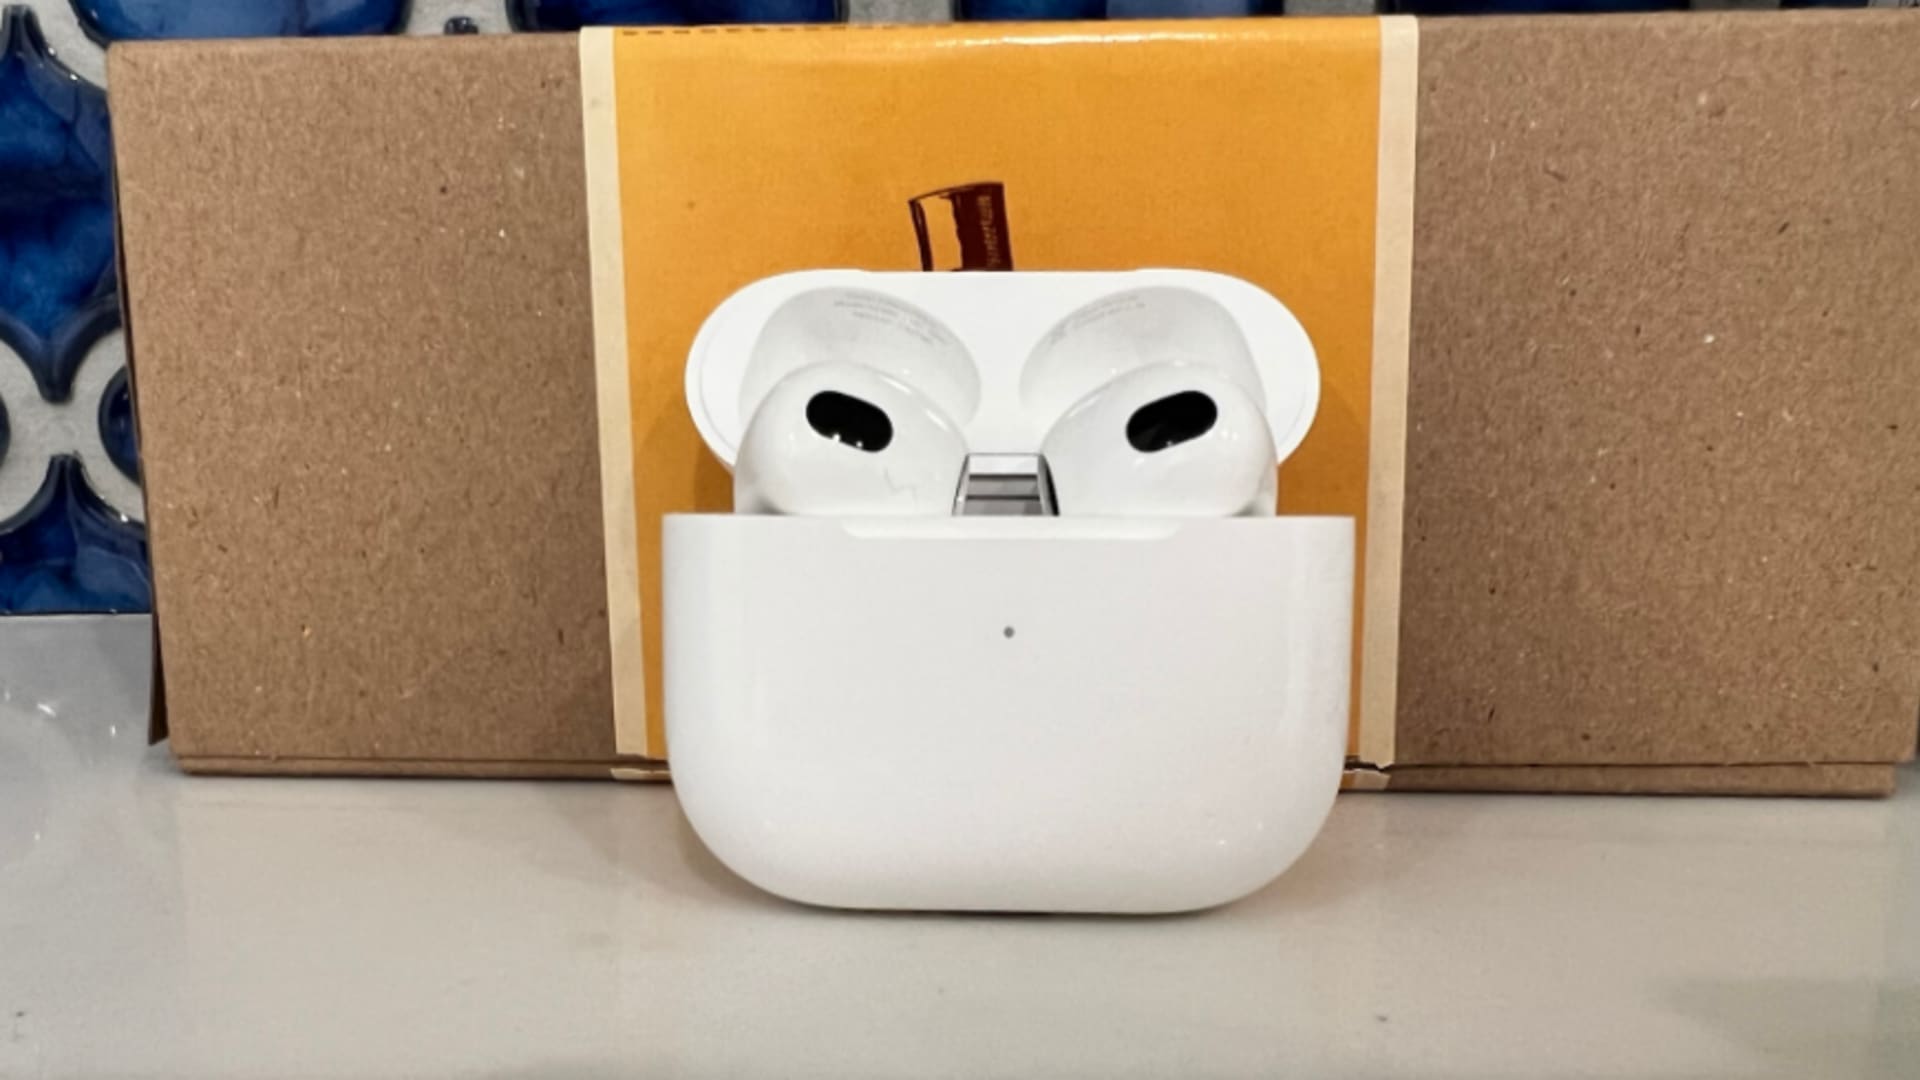 Apple AirPods with Spatial Audio